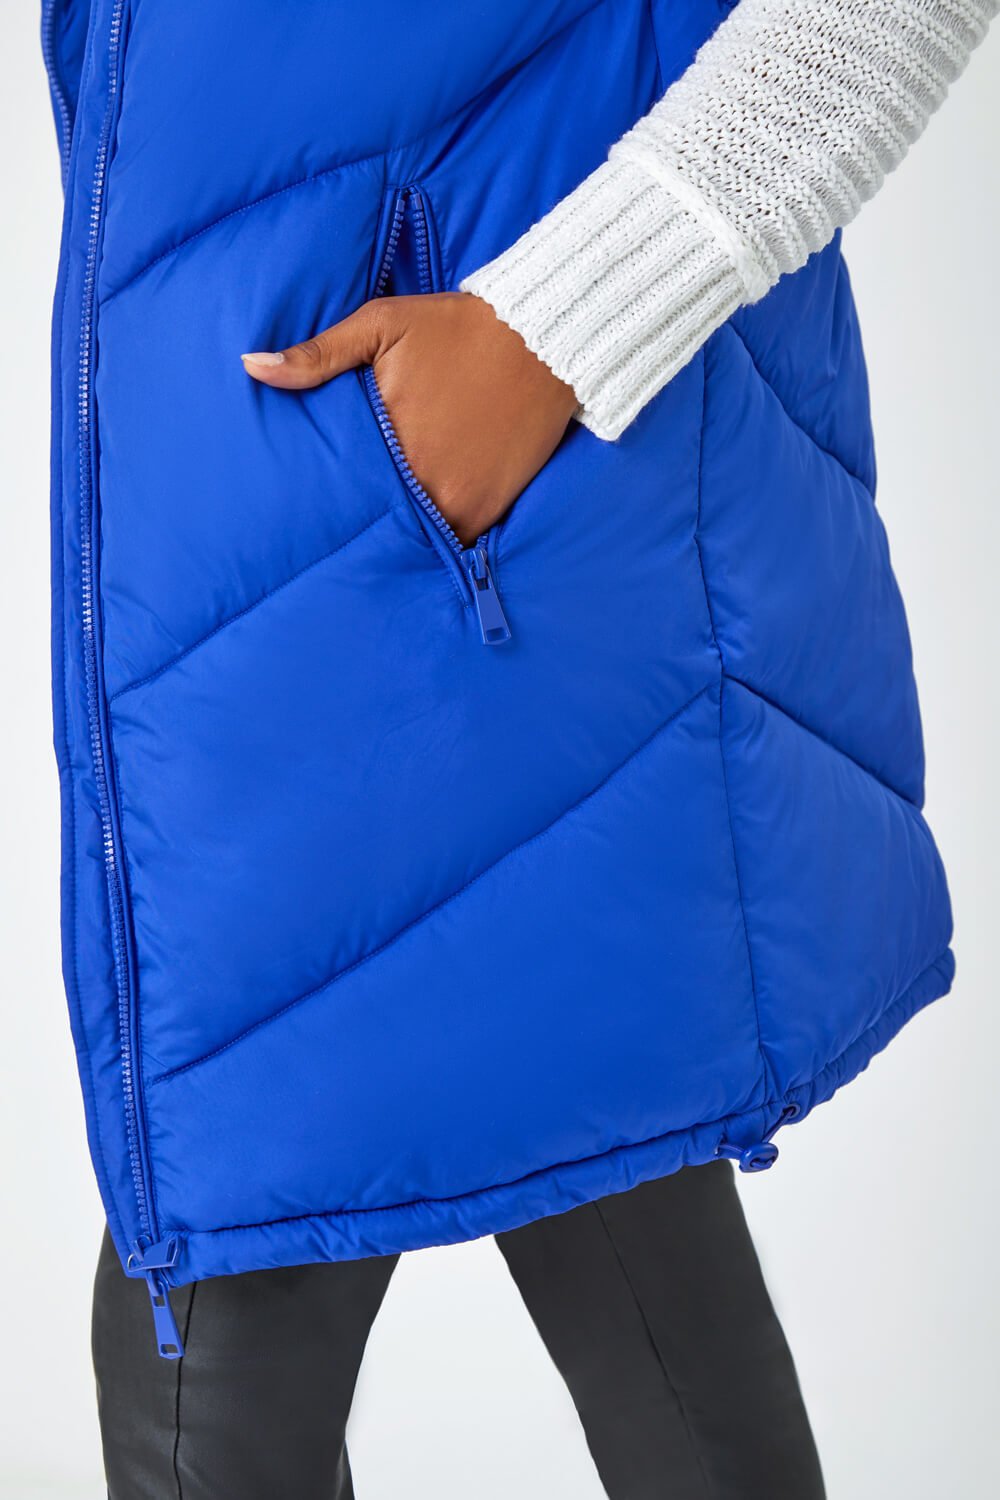 Royal Blue Longline Quilted Hooded Gilet, Image 5 of 5